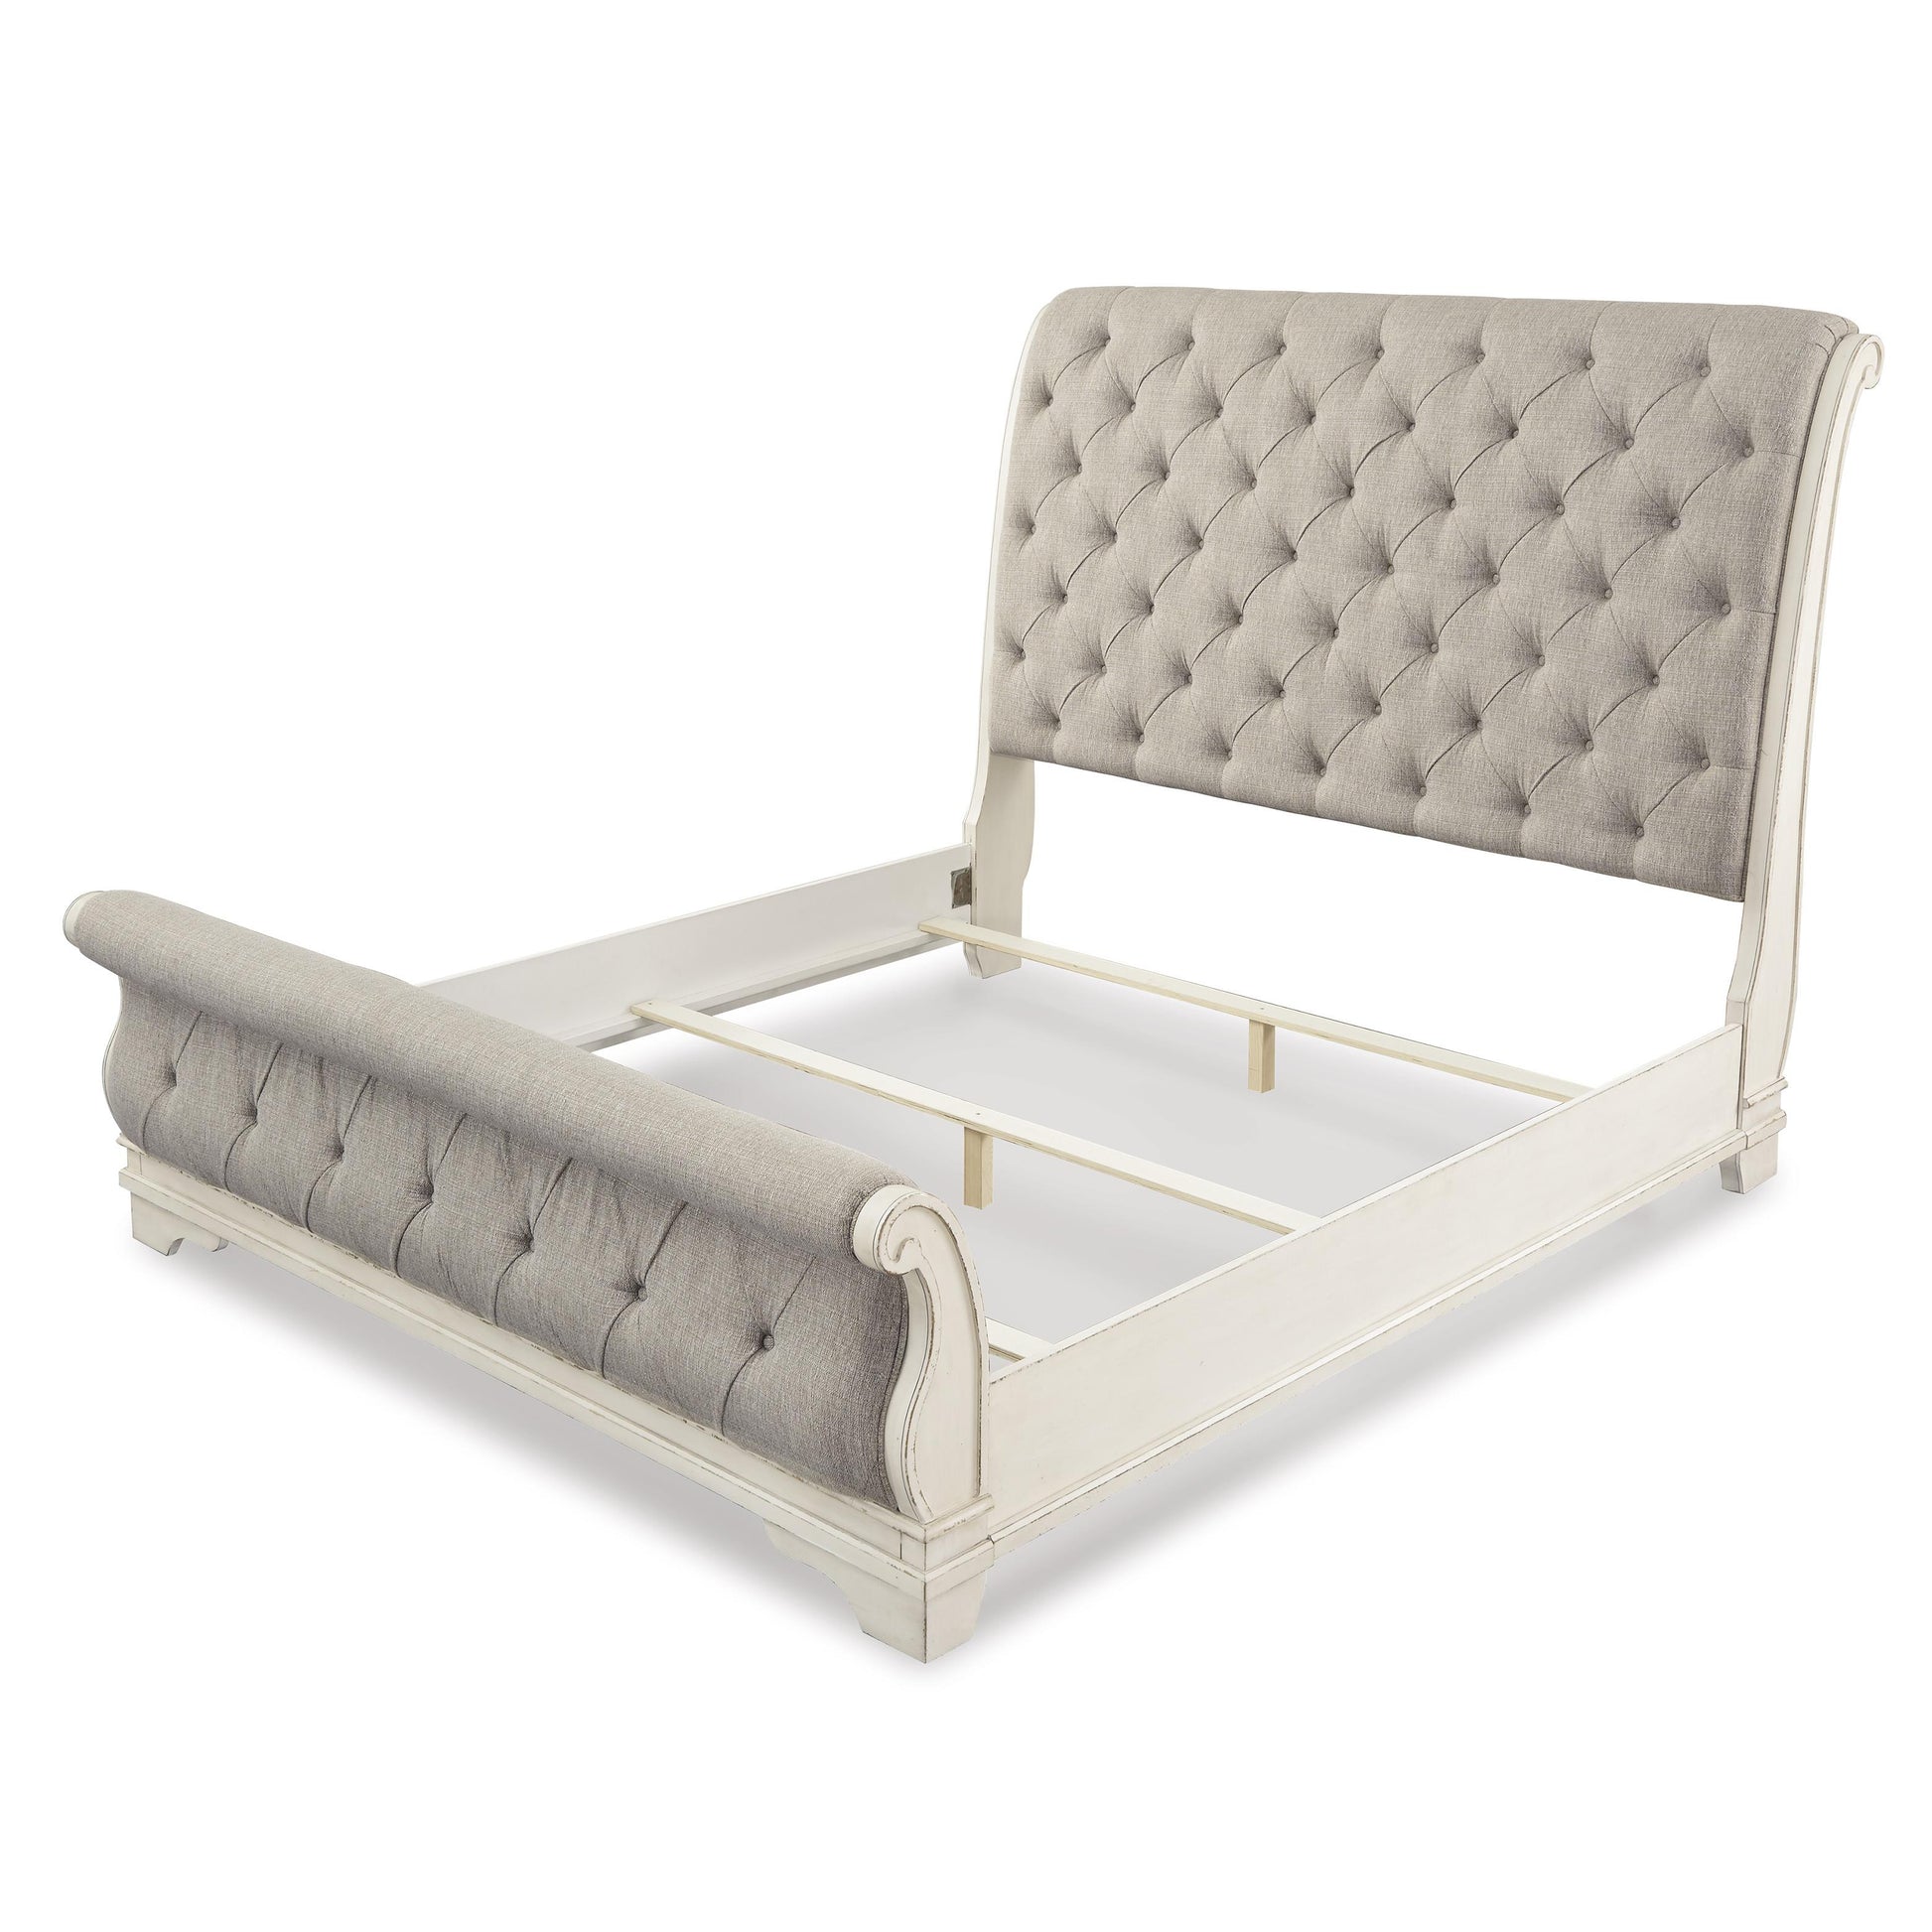 Signature Design by Ashley Realyn Queen Upholstered Sleigh Bed B743-77/B743-74/B743-98 IMAGE 4